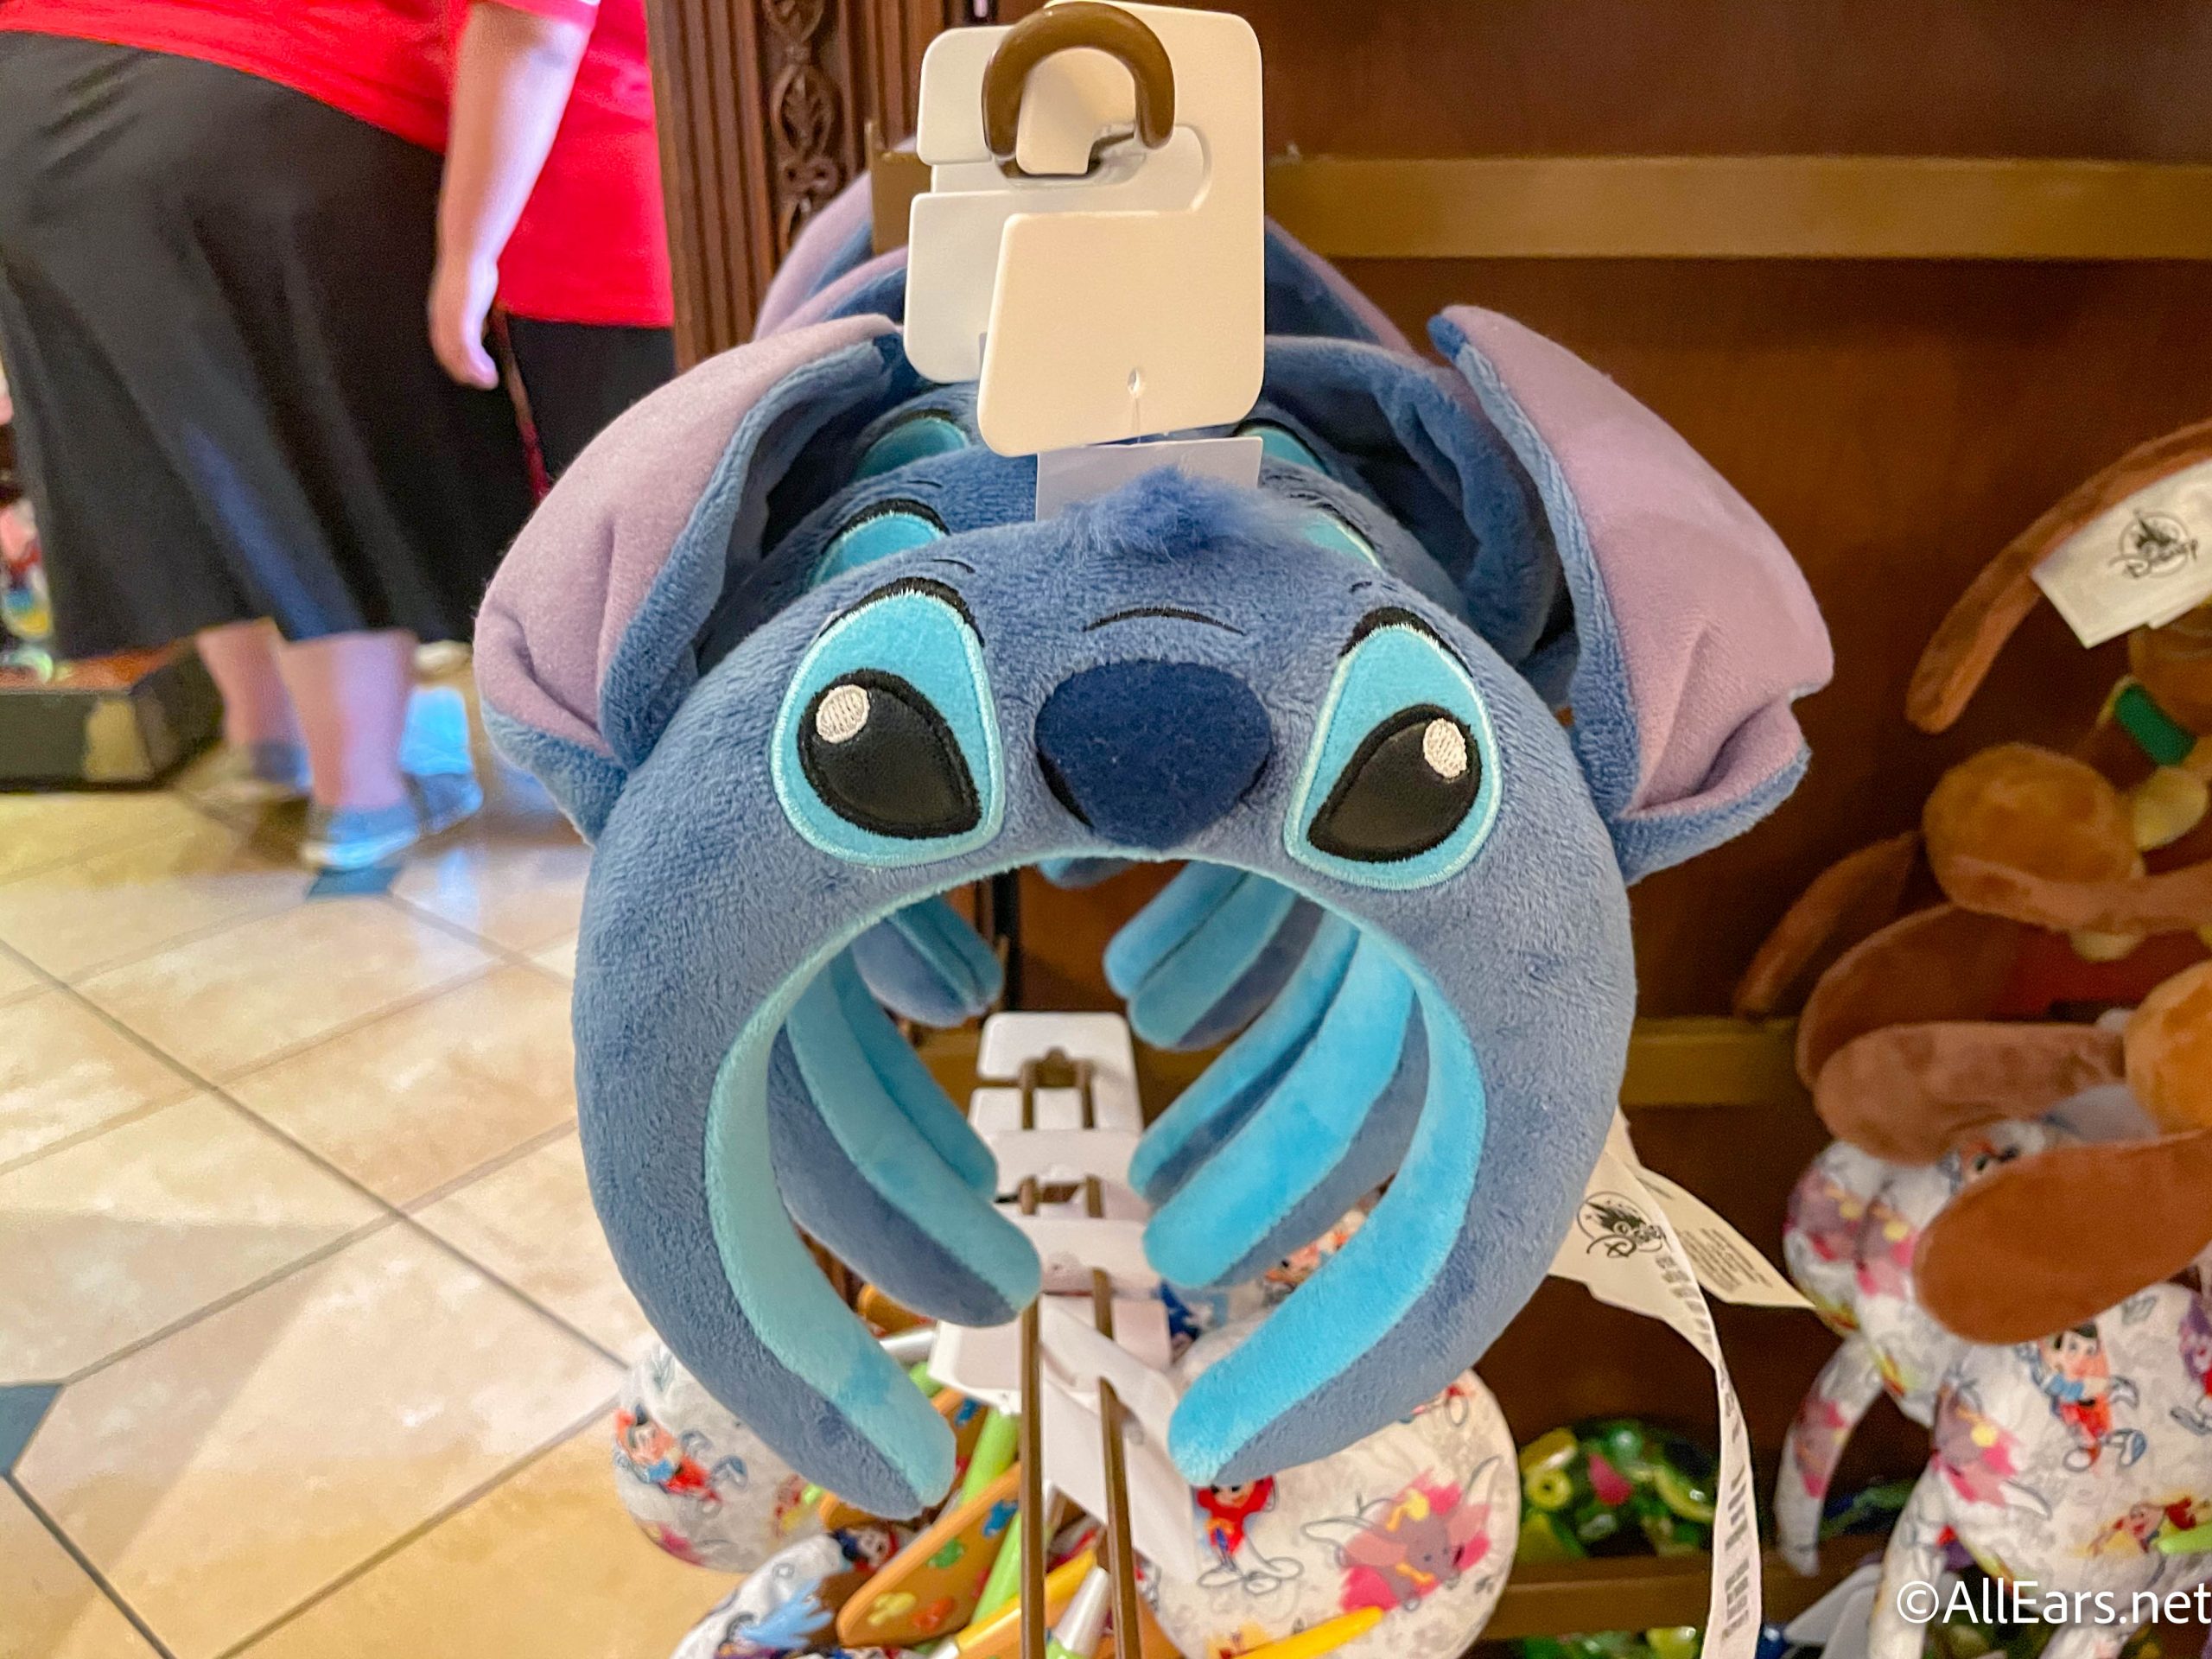 PHOTOS New Stitch Ears Have Arrived in Disney World!